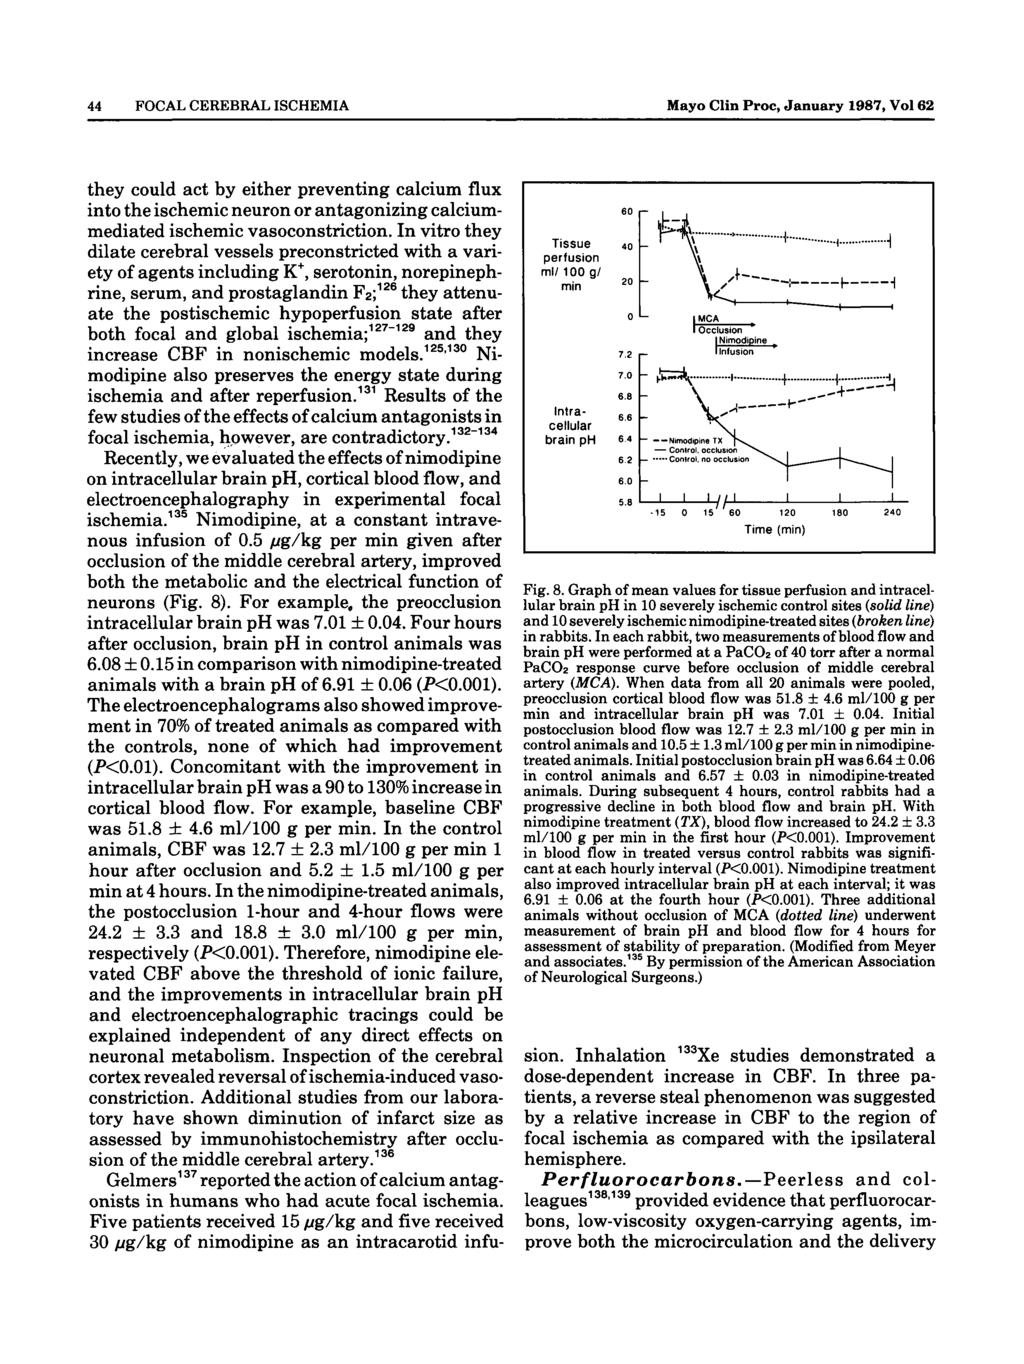 44 FOCAL CEREBRAL ISCHEMIA Mayo Clin Proc, January 1987, Vol 62 they could act by either preventing calcium flux into the ischemic neuron or antagonizing calciummediated ischemic vasoconstriction.